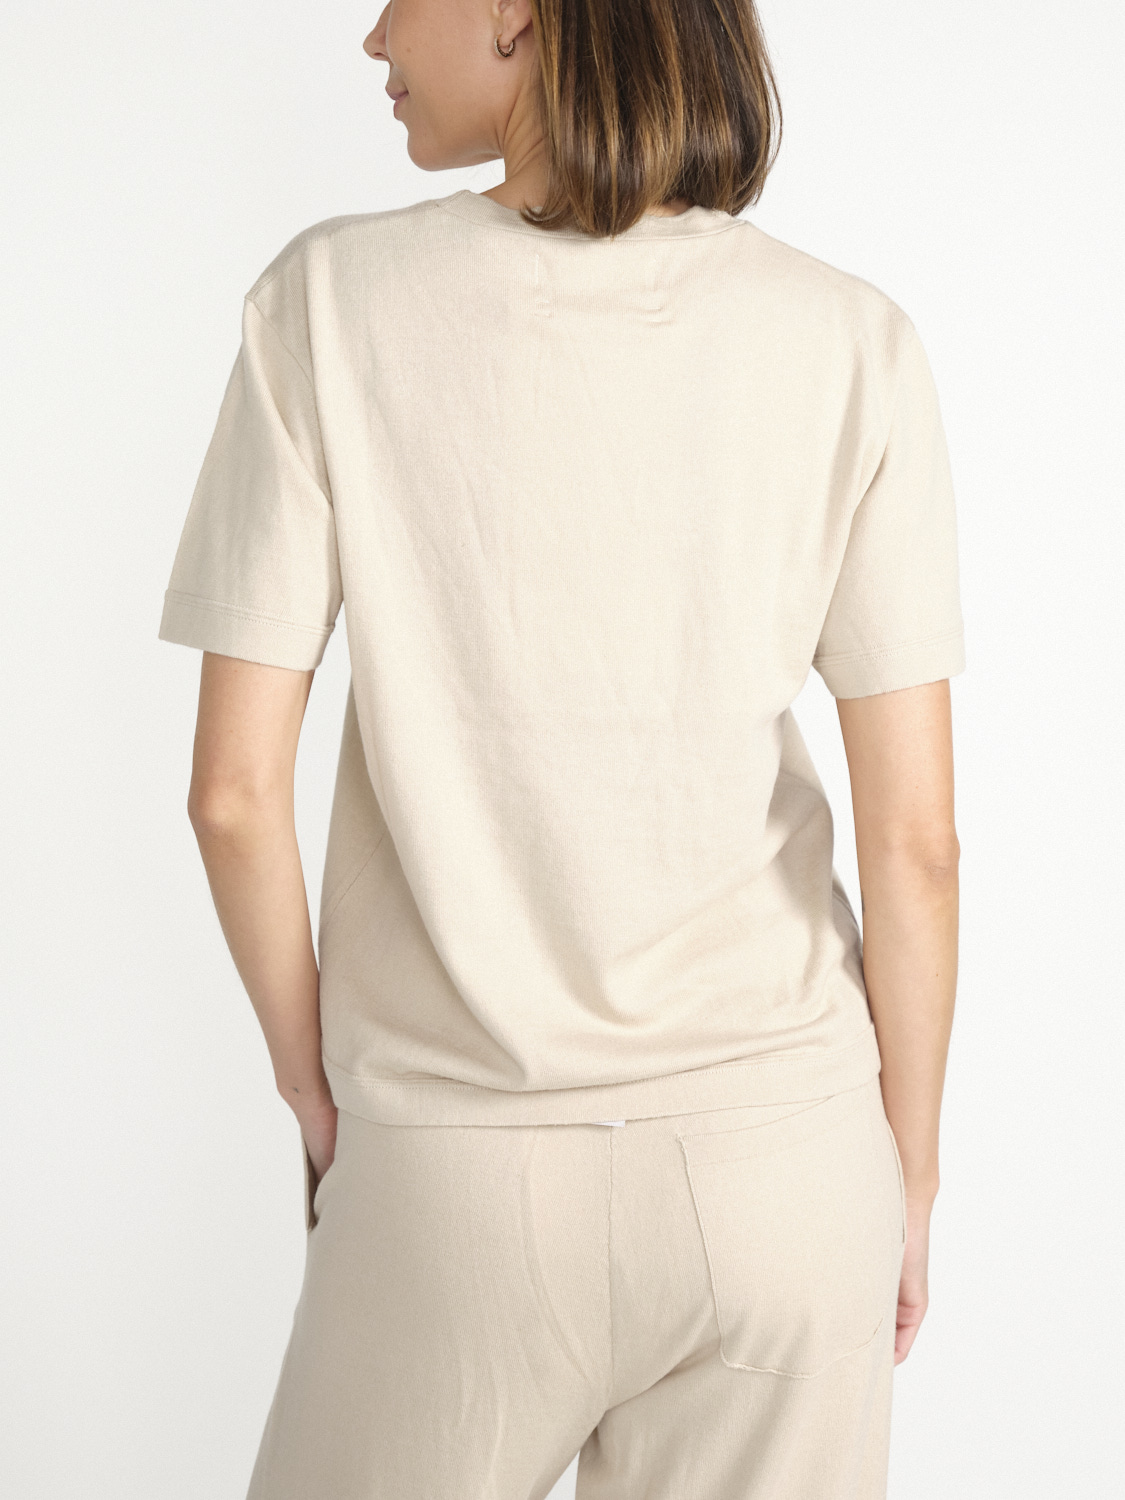 Extreme Cashmere N°268 Cuba – shirt made of cotton-cashmere mix  creme One Size